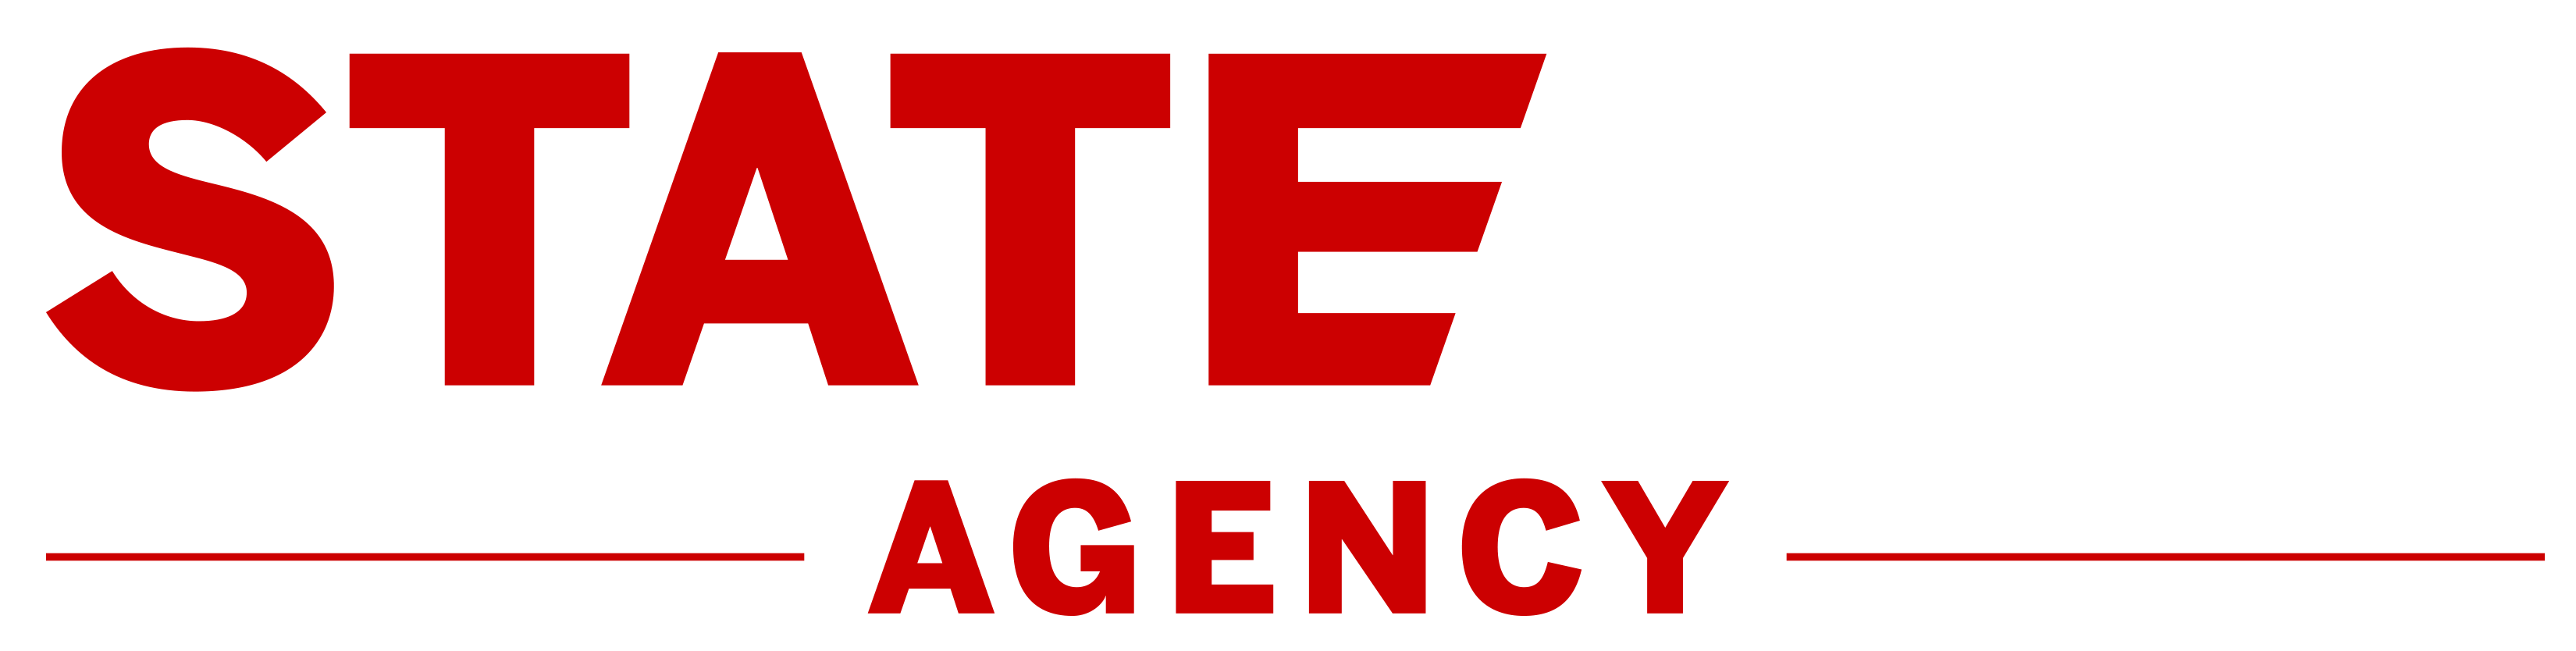 cropped-State-of-the-art-agency-Logo-Final.png